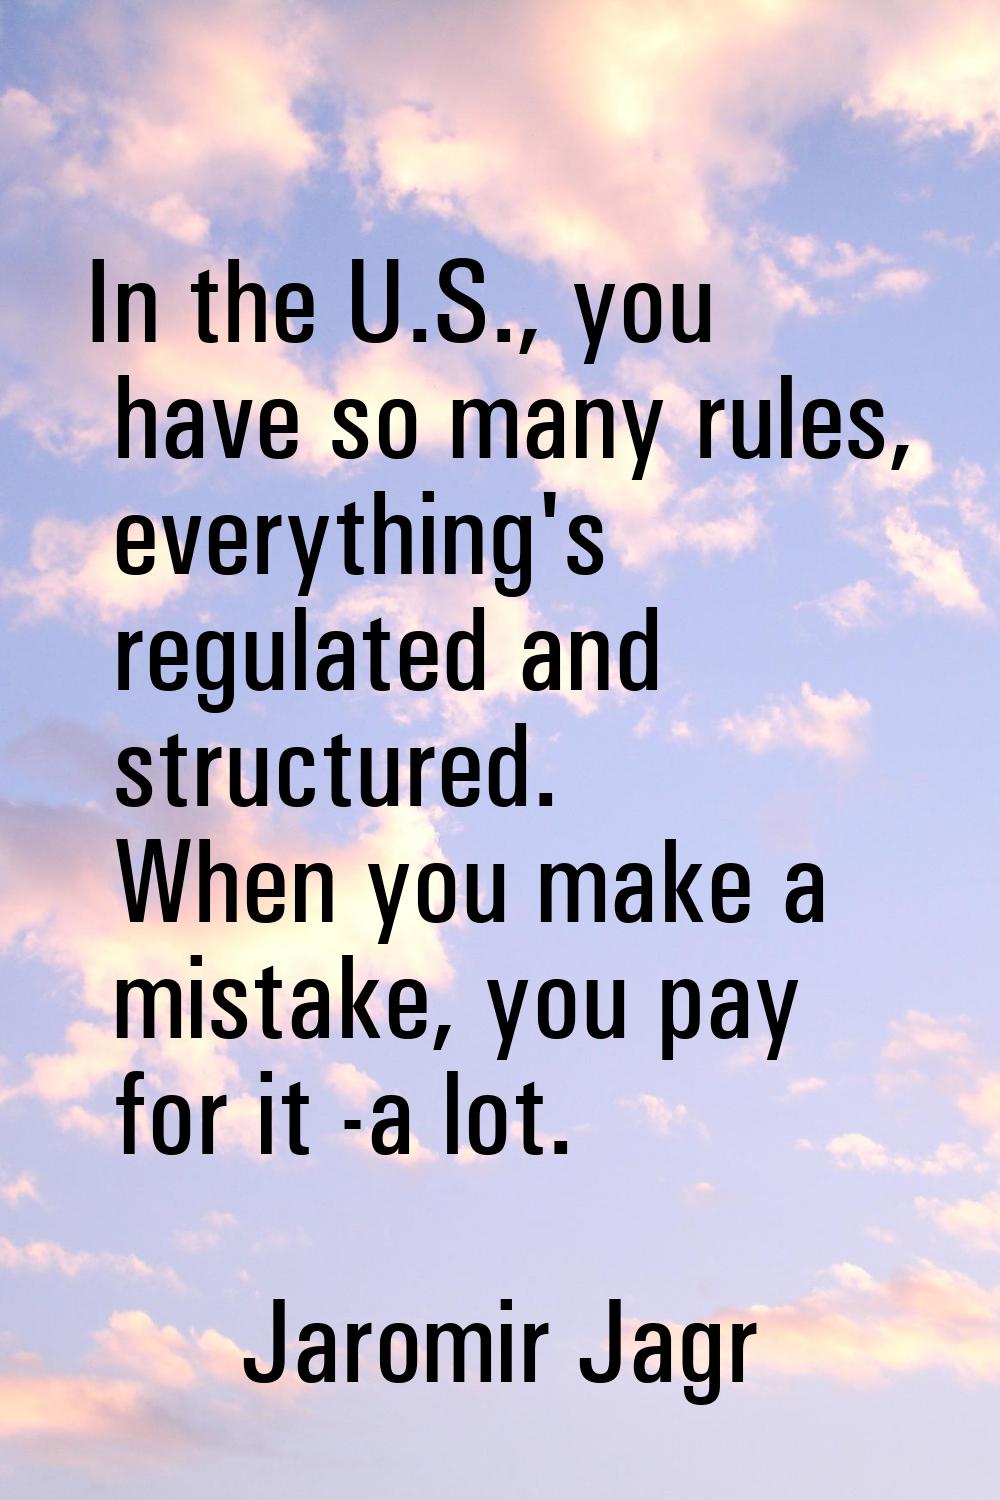 In the U.S., you have so many rules, everything's regulated and structured. When you make a mistake